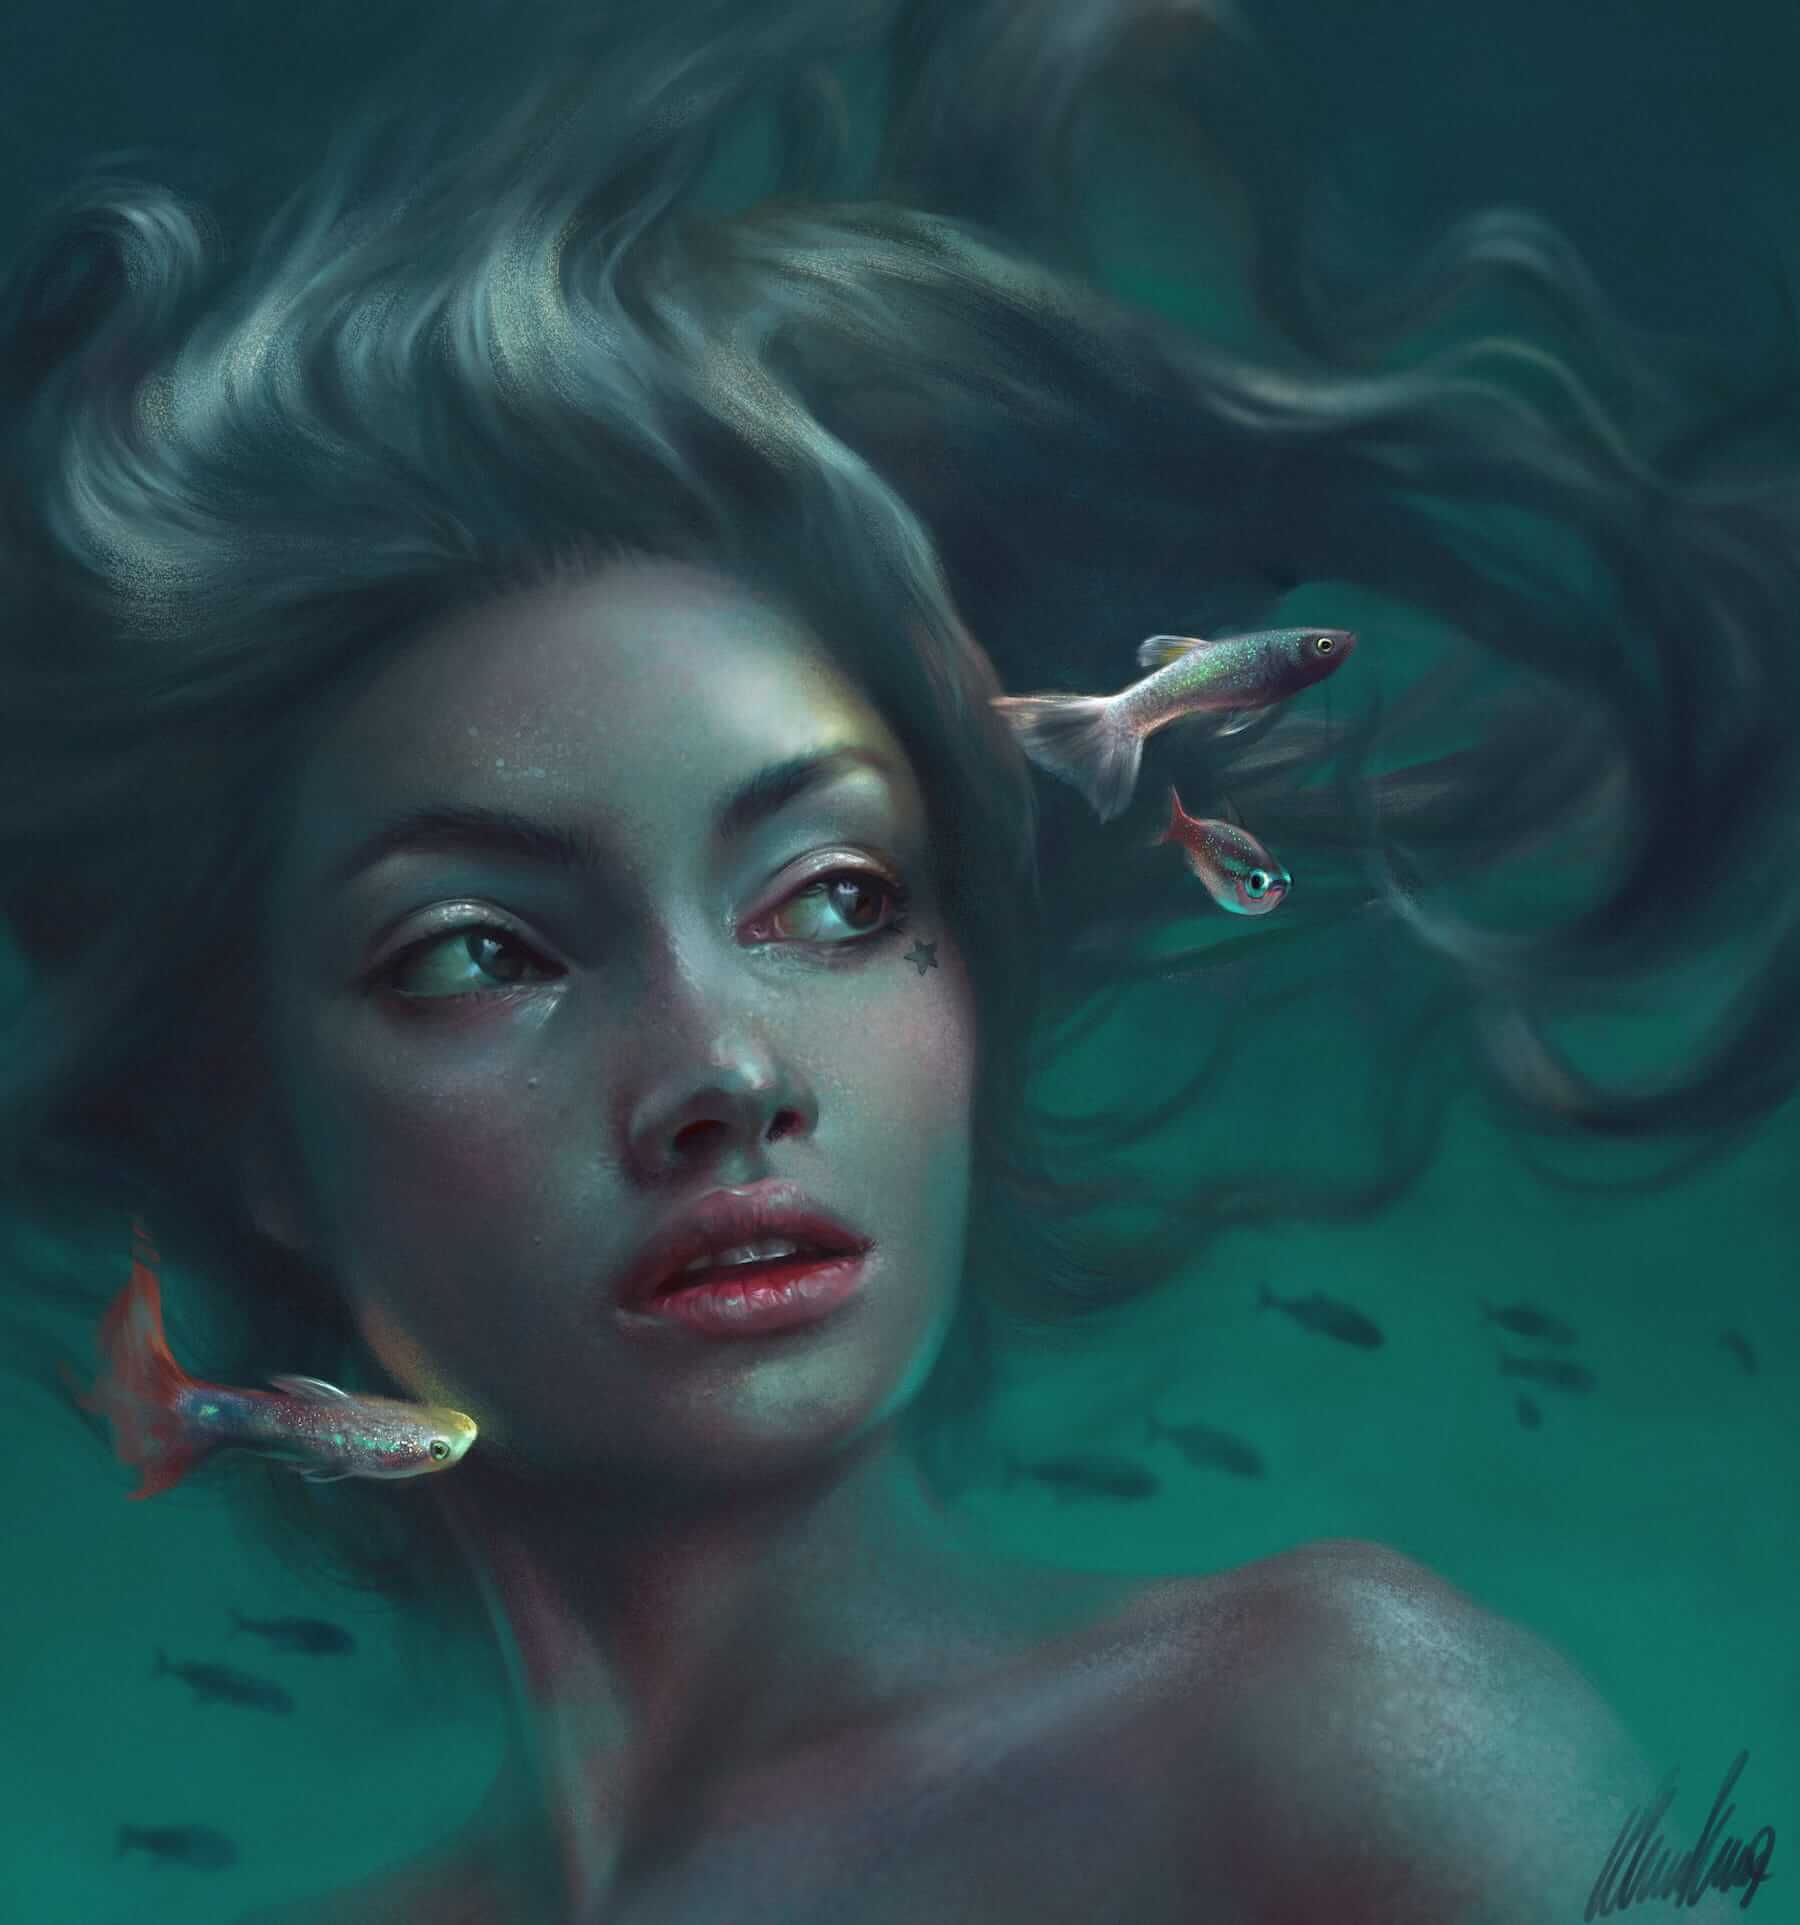 Mermaid and Fishes 2021 by Carina Klinkhammer